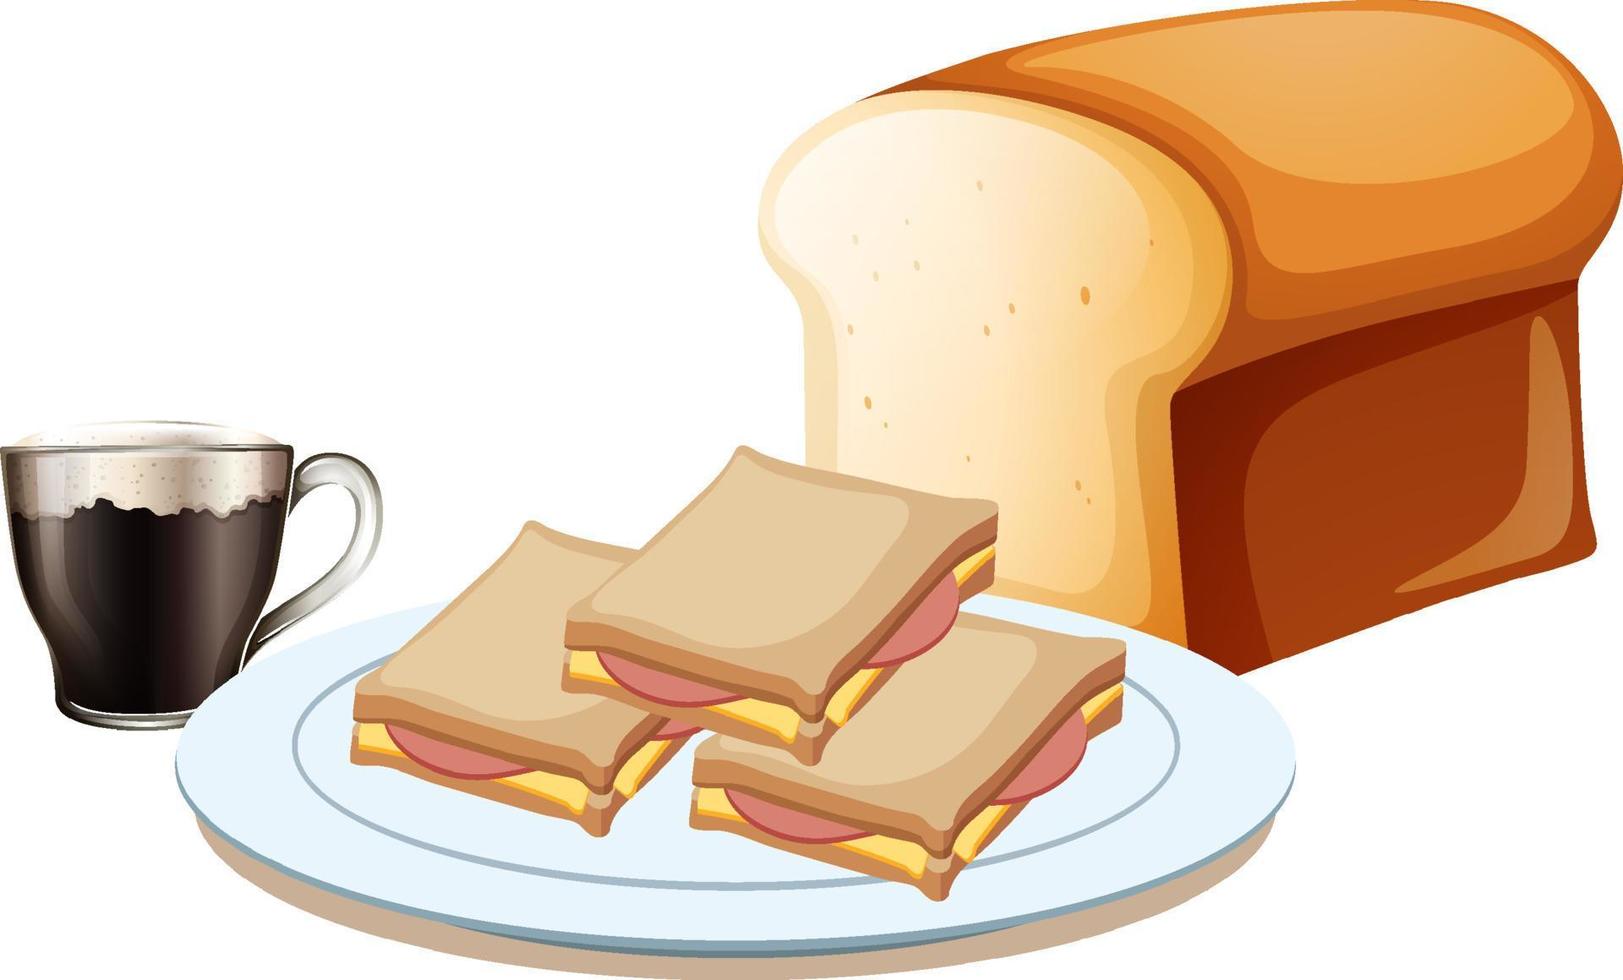 Breakfast set with sandwich and coffee vector